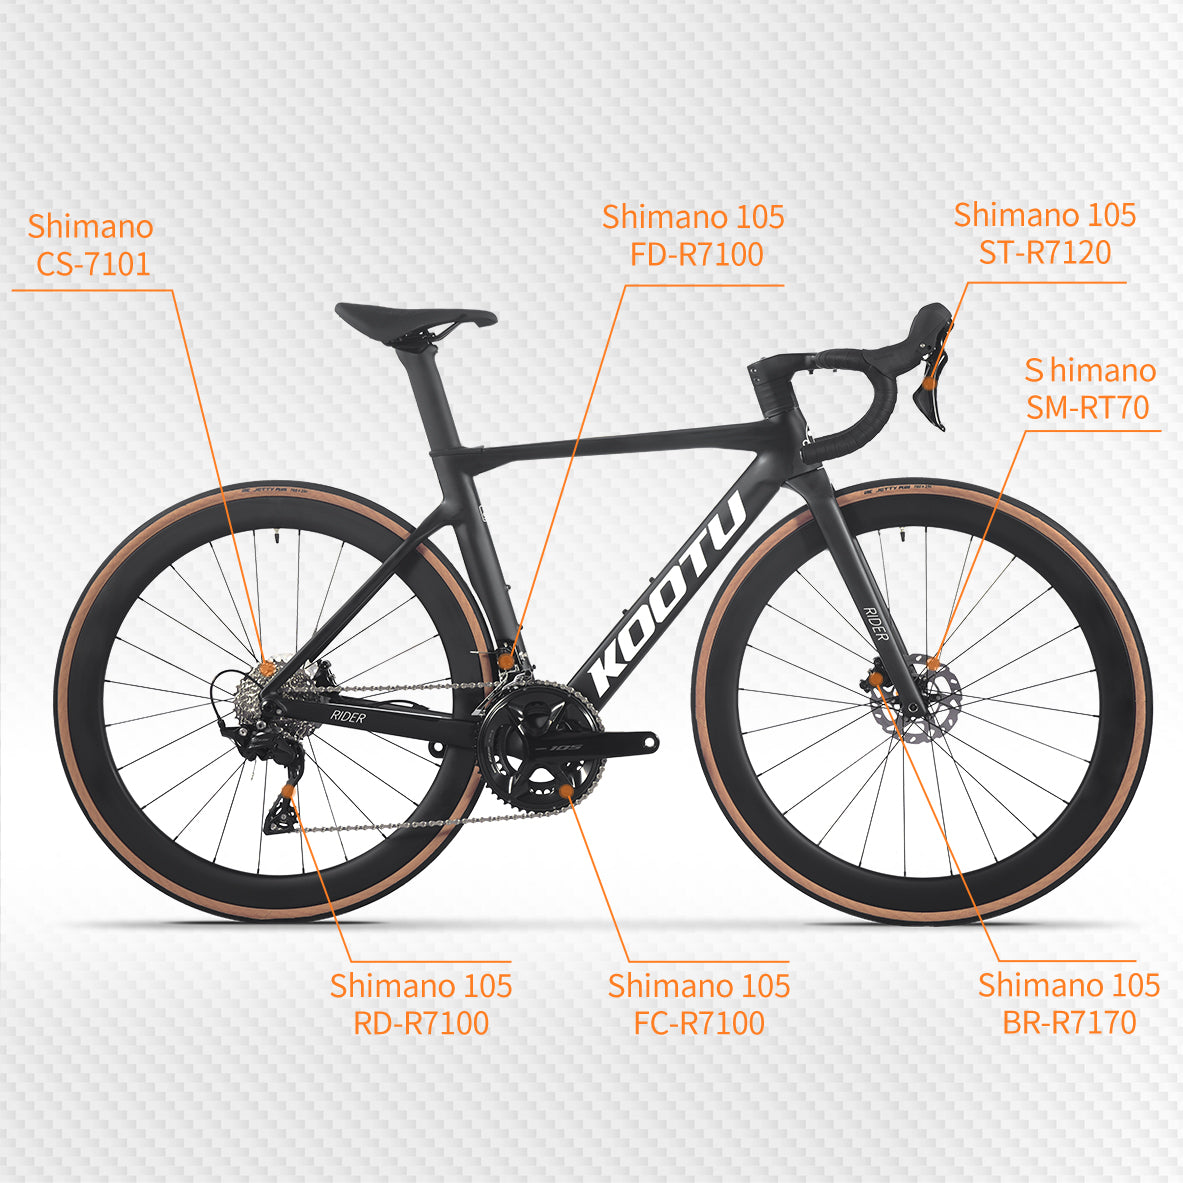 Integrated Carbon Road Bike|Shimano 105 R7120 Groupset|Rider 7.2 